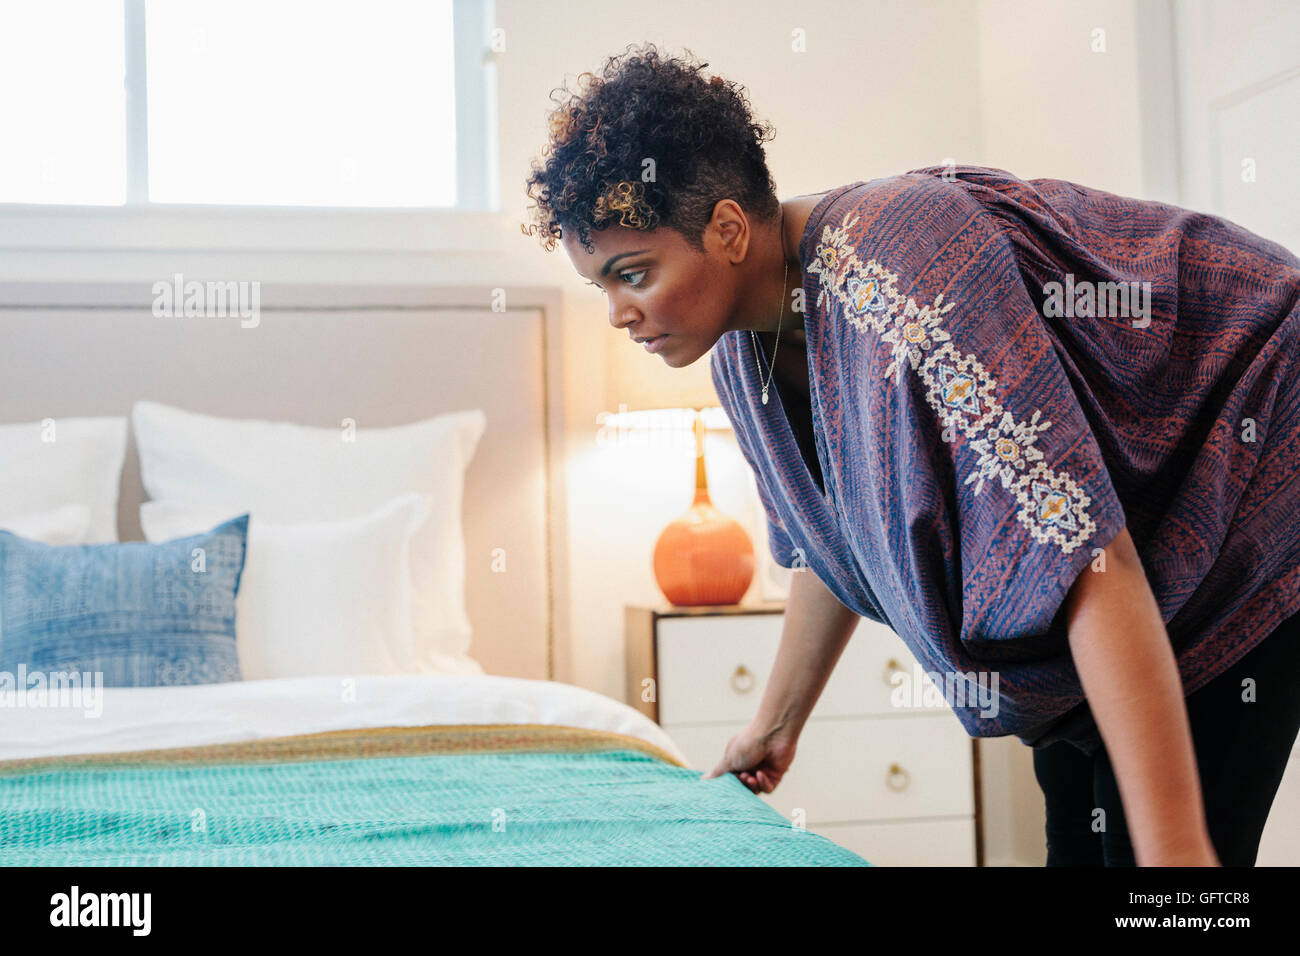 A woman smoothing a throw over a double bed in a bedroom. Stock Photo